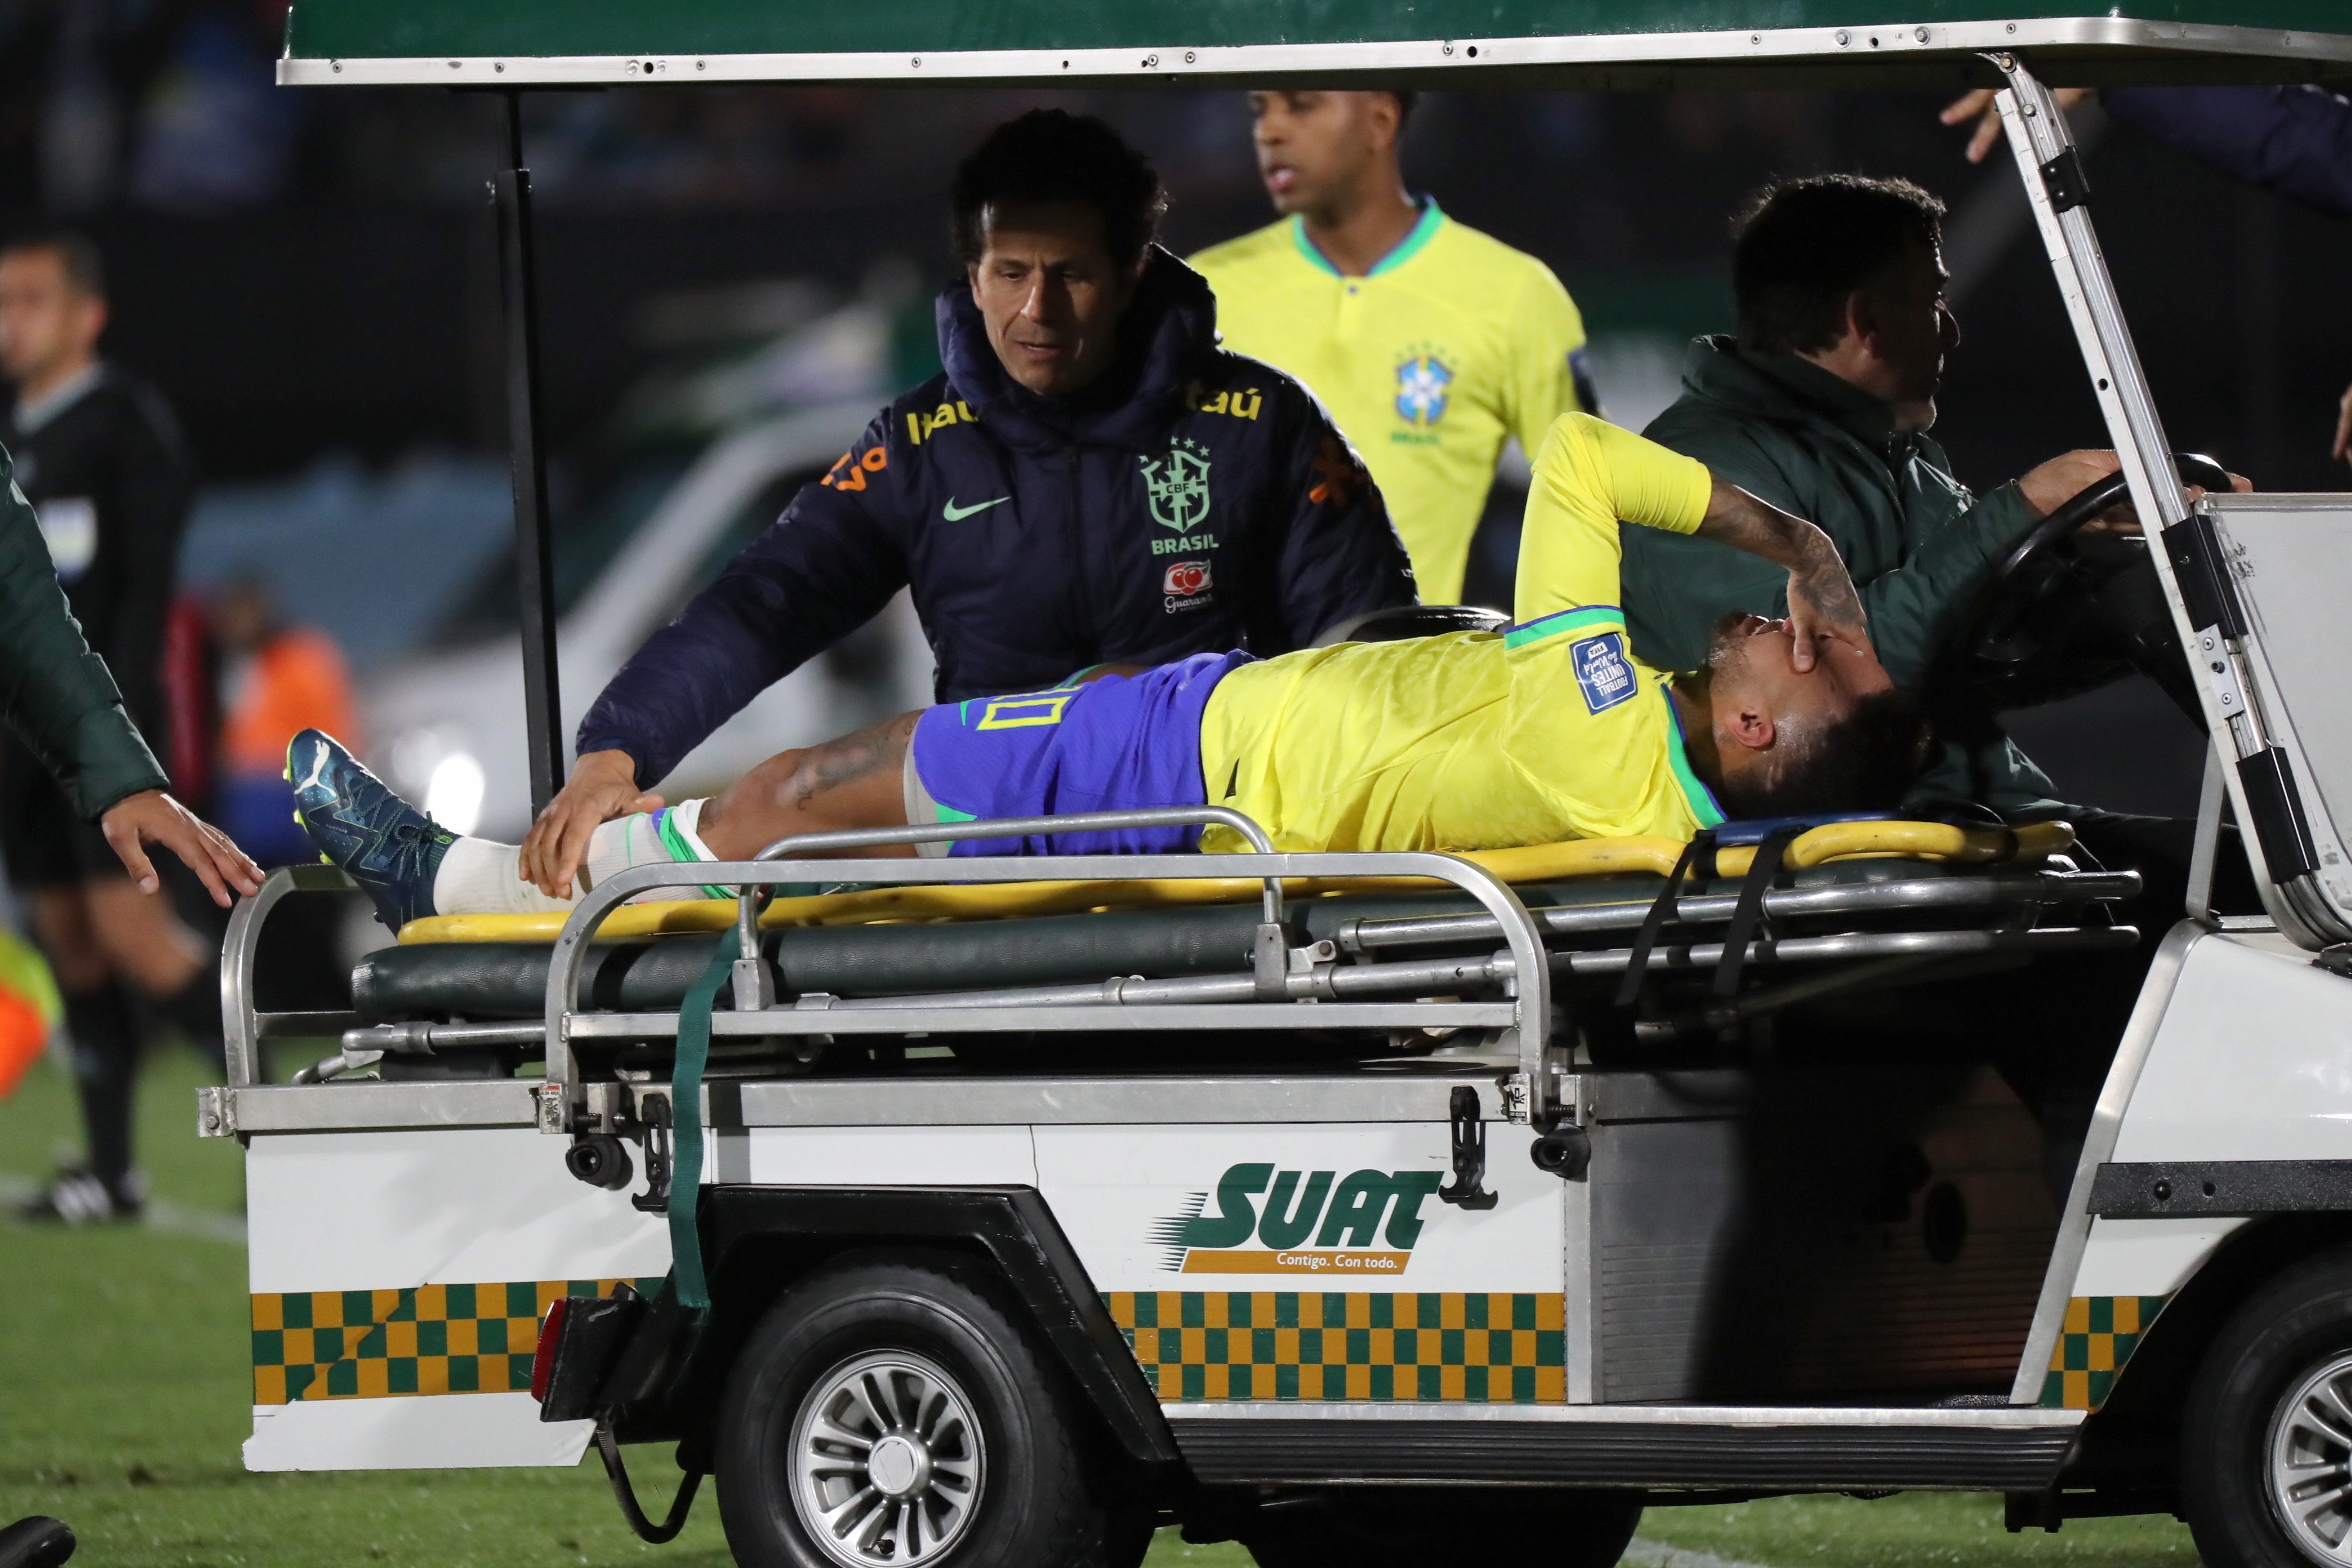 Brazil’s Neymar is stretchered off the field after an injury in the FIFA World Cup 2026 qualifier against Uruguay, Photo: EPA-EFE